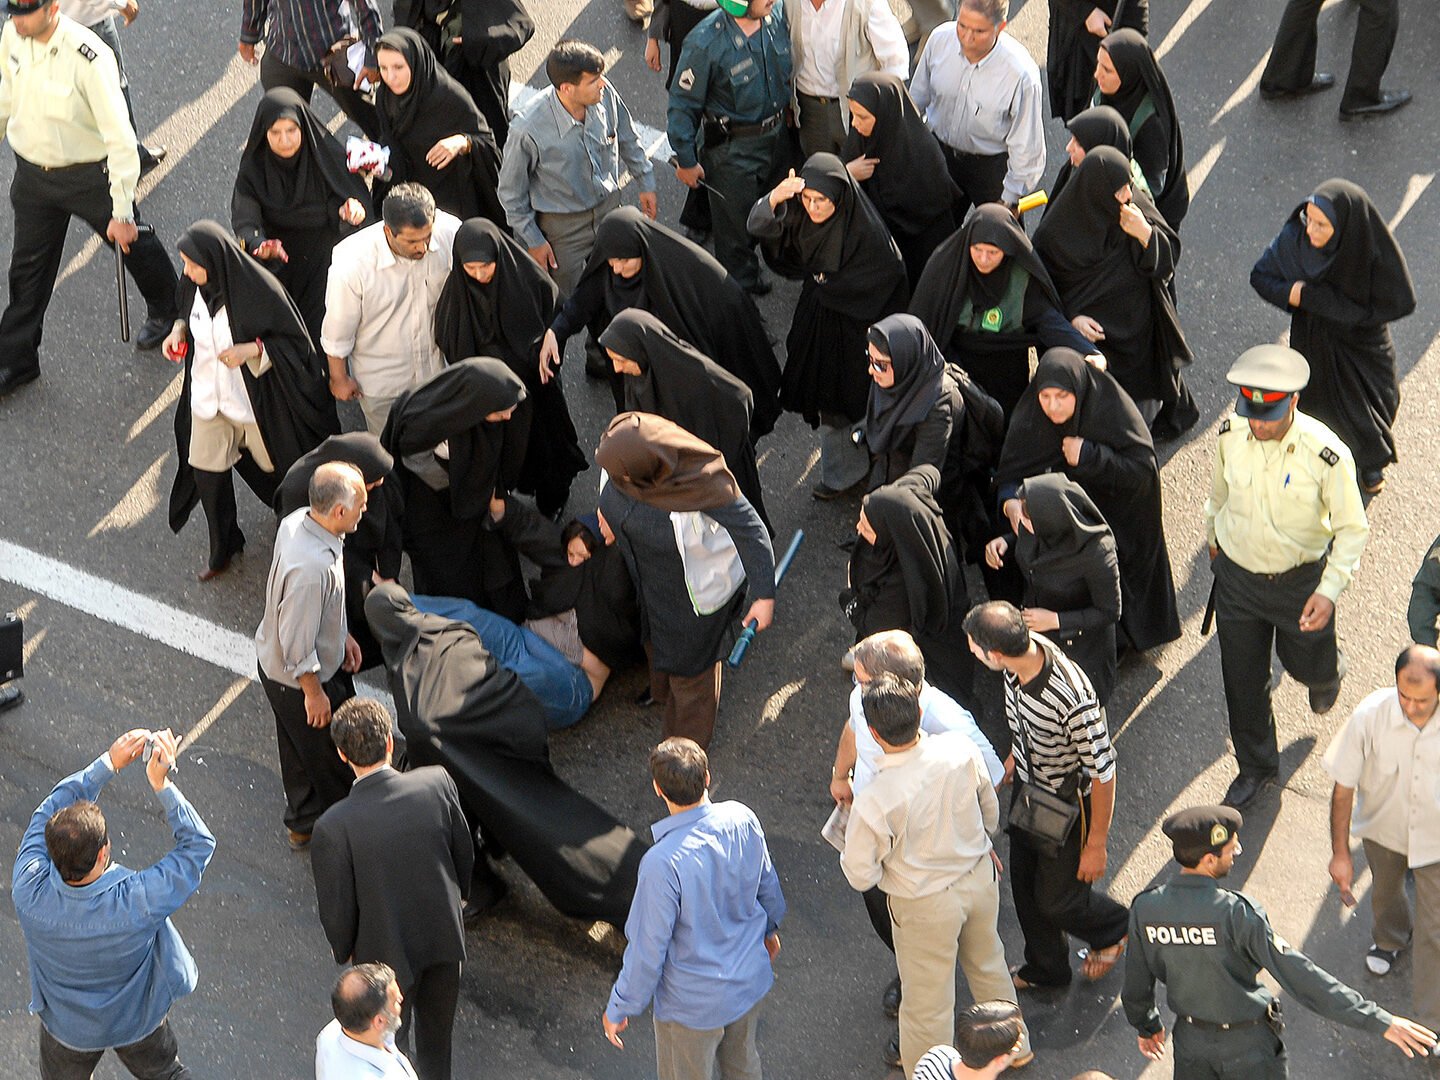 A women's rights demonstration took place in Tehran's Haft Tir Square in June 2006, during which police beat and arbitrarily detained demonstrators. Arash Ashourinia